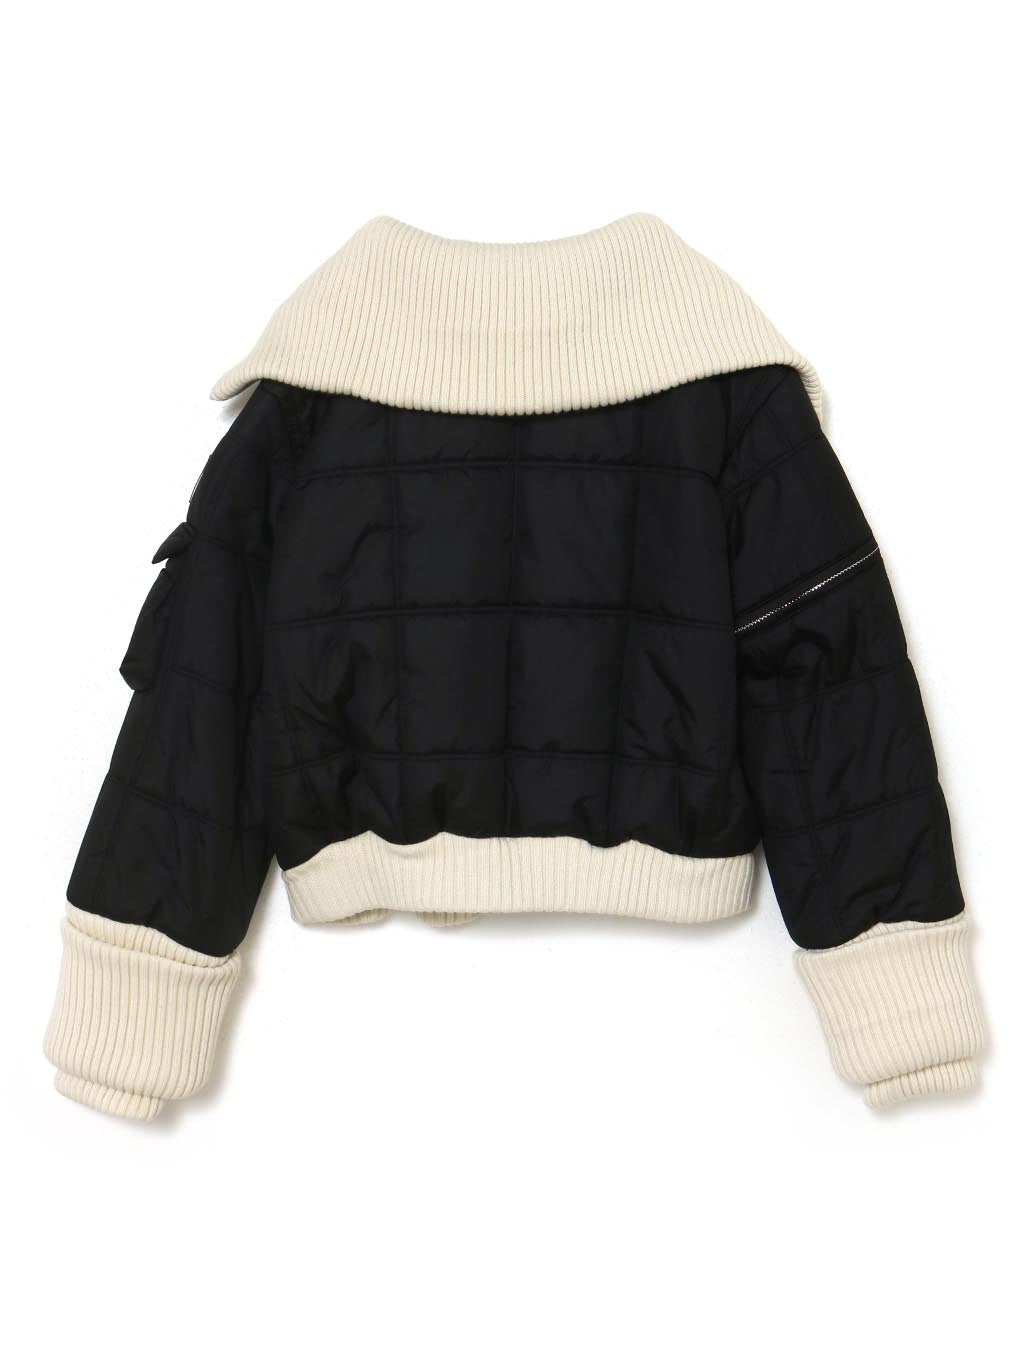 andmary Mary quilting jacket 白　skirt新品未使用未開封でお送りします